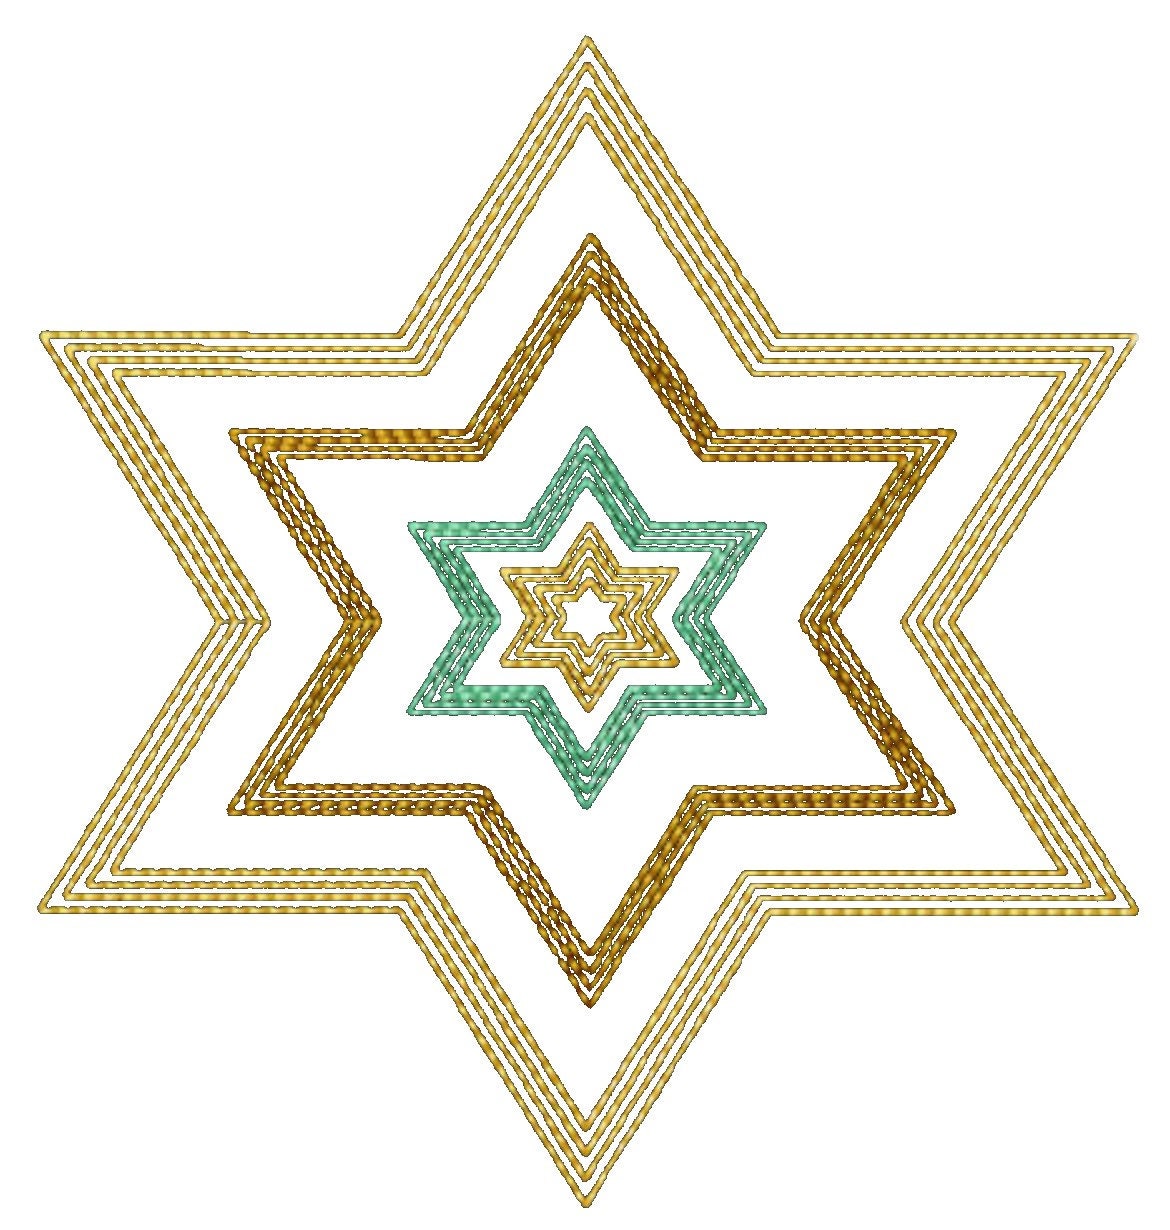 Embroidered Star of David Judaica Throw Pillow Cover. 18” x 18” Cotton pillow cover. Choice of 5 different Stars and 19 Pillow Colors